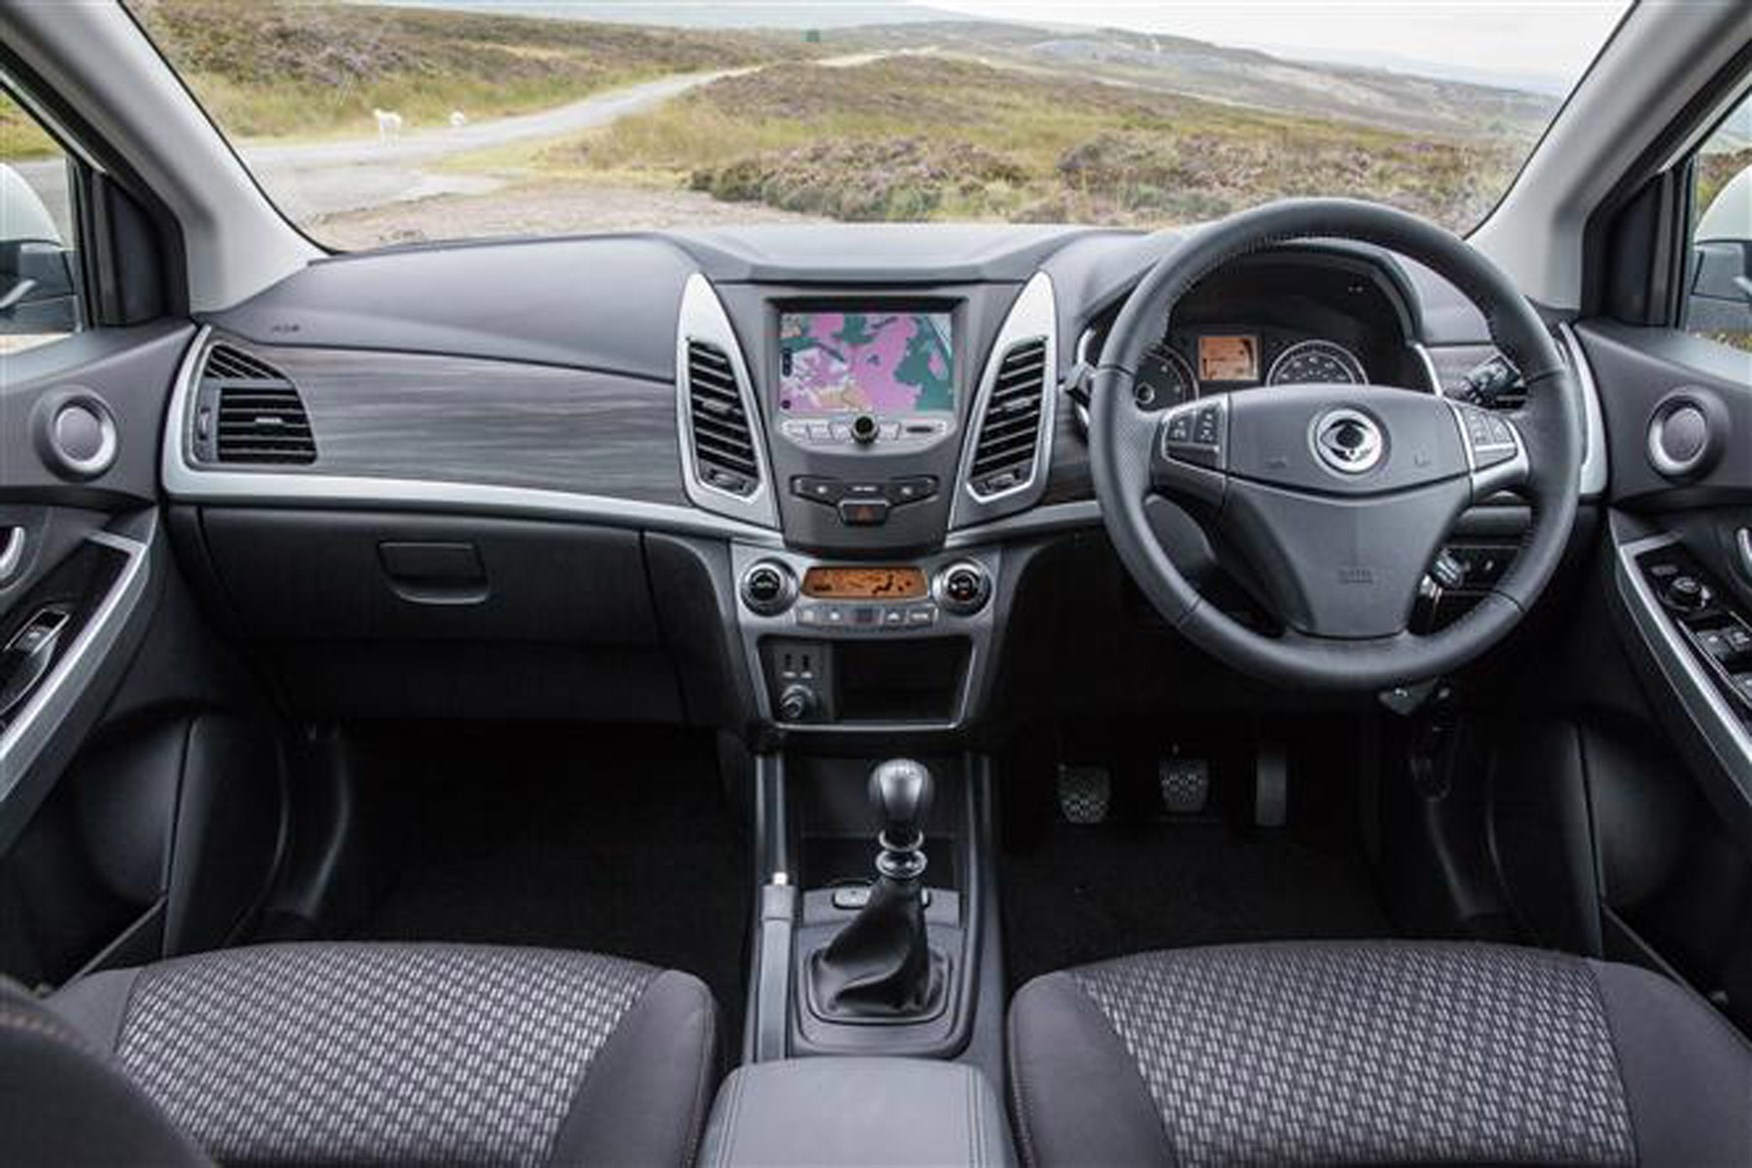 Ssangyong Korando review on Parkers Vans - interior